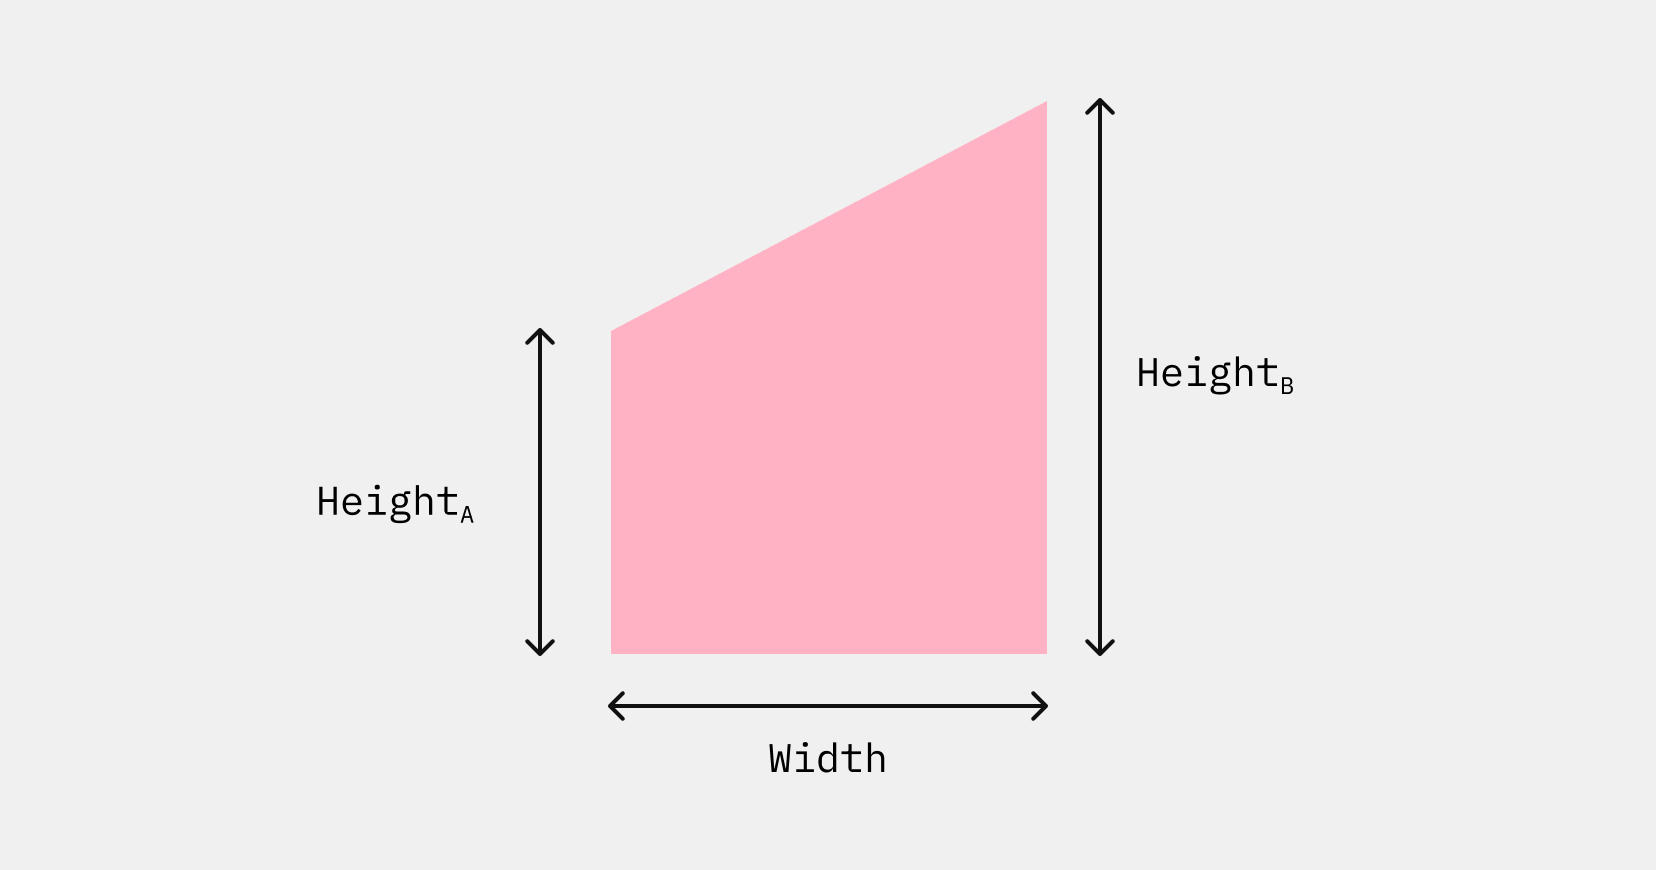 A trapezoid with a horizontal base of 'Width', and heights HeightA and Height B